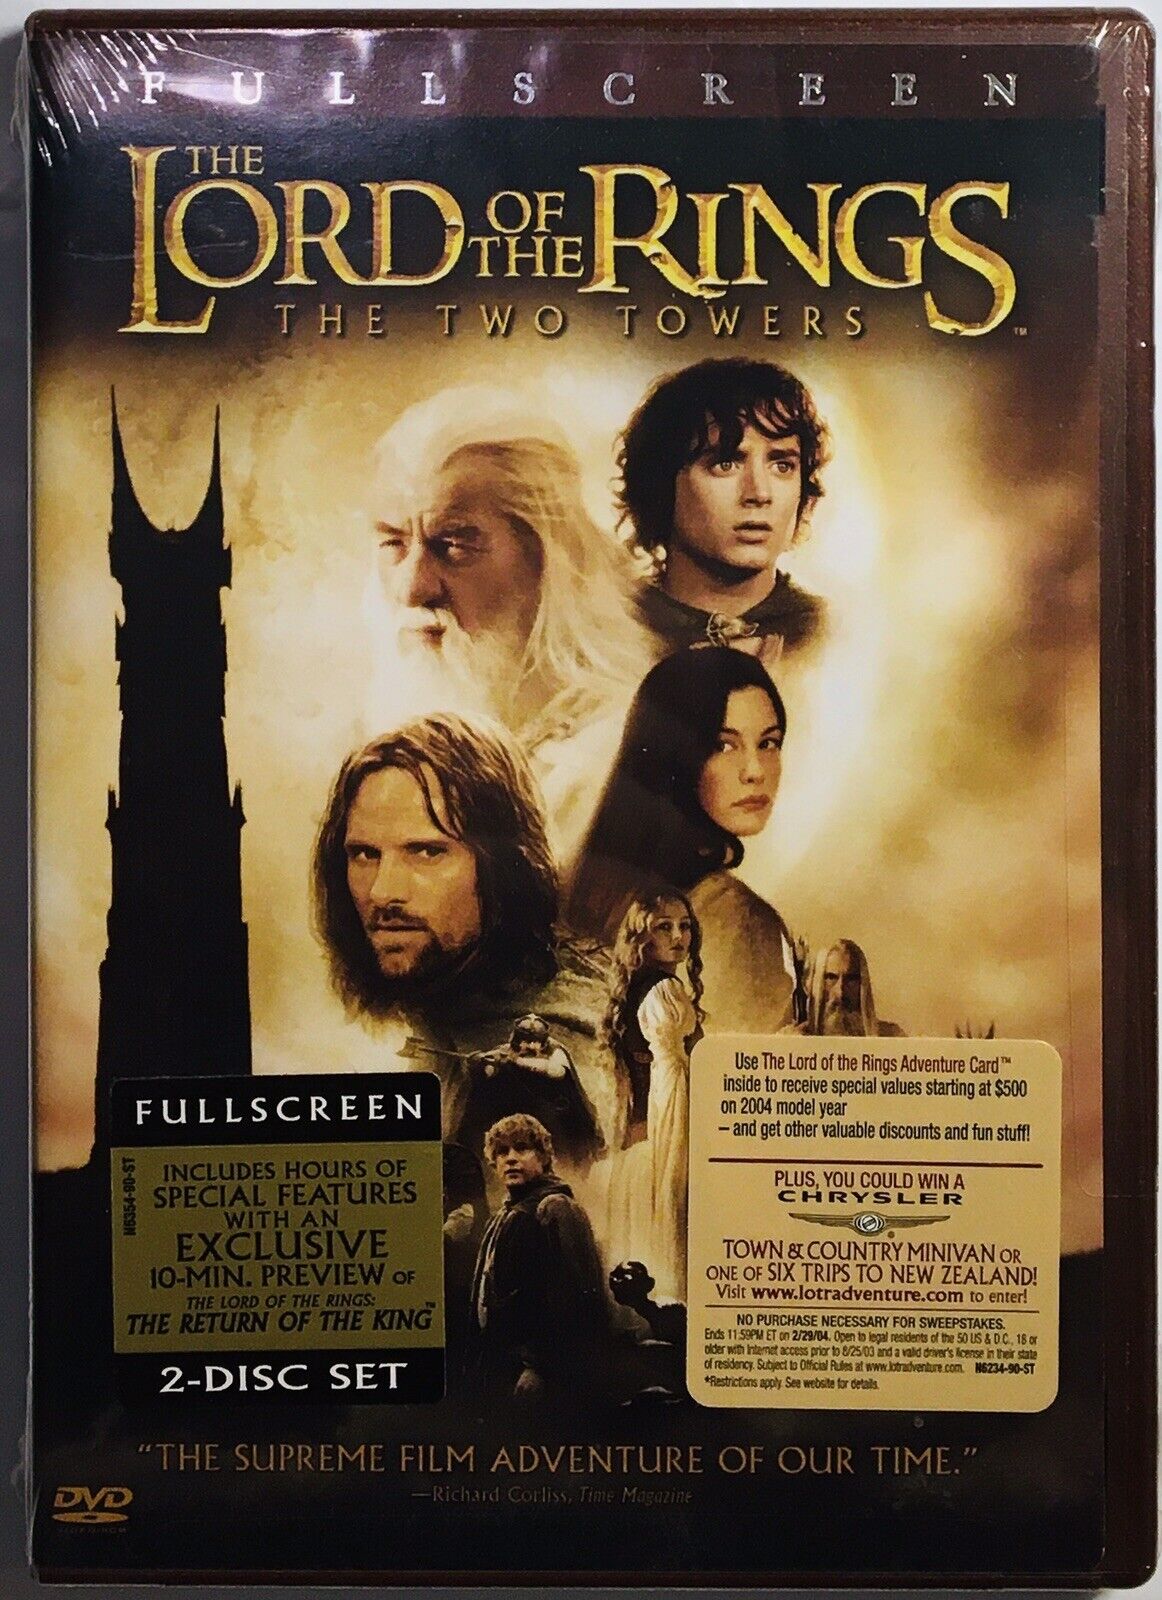 The Lord Of the Rings - The Two Towers (DVD, 2002, 2-Disc Set, Full Screen)  NEW 794043635427 | eBay